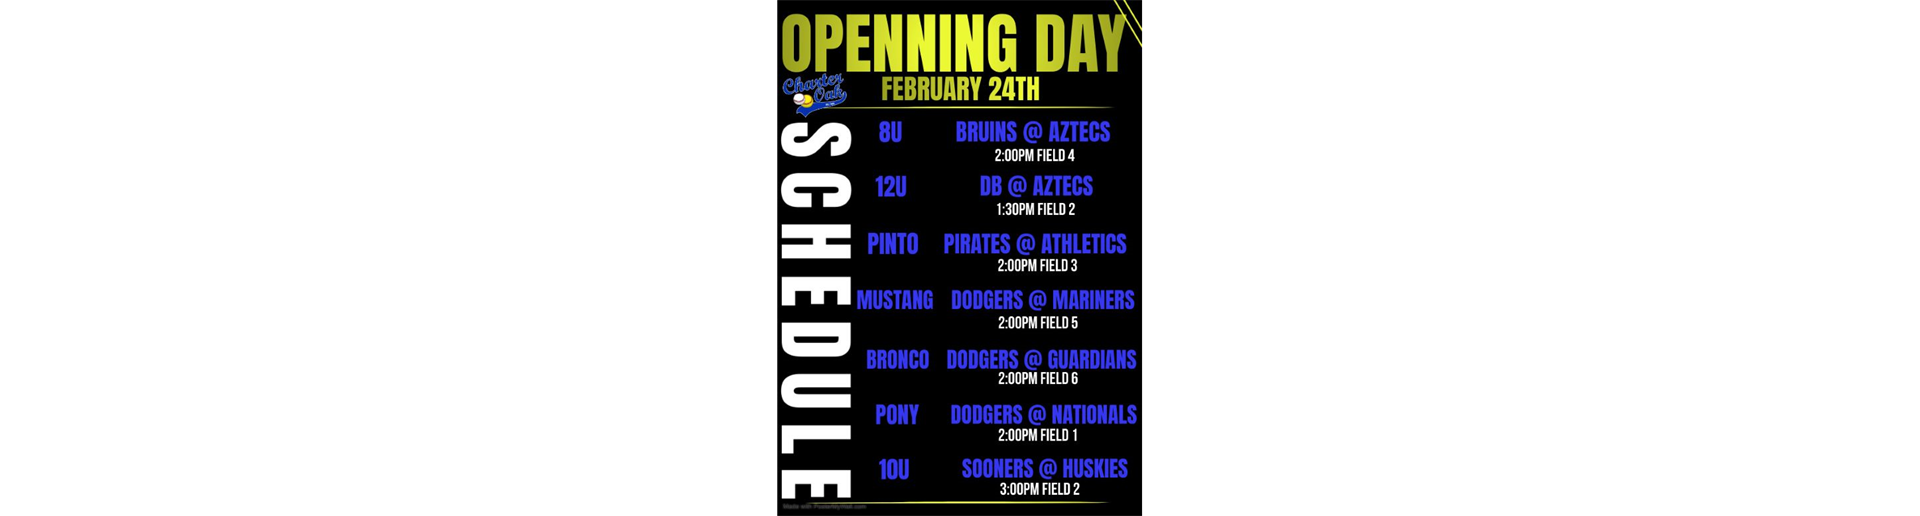 Opening Day GAMES!!